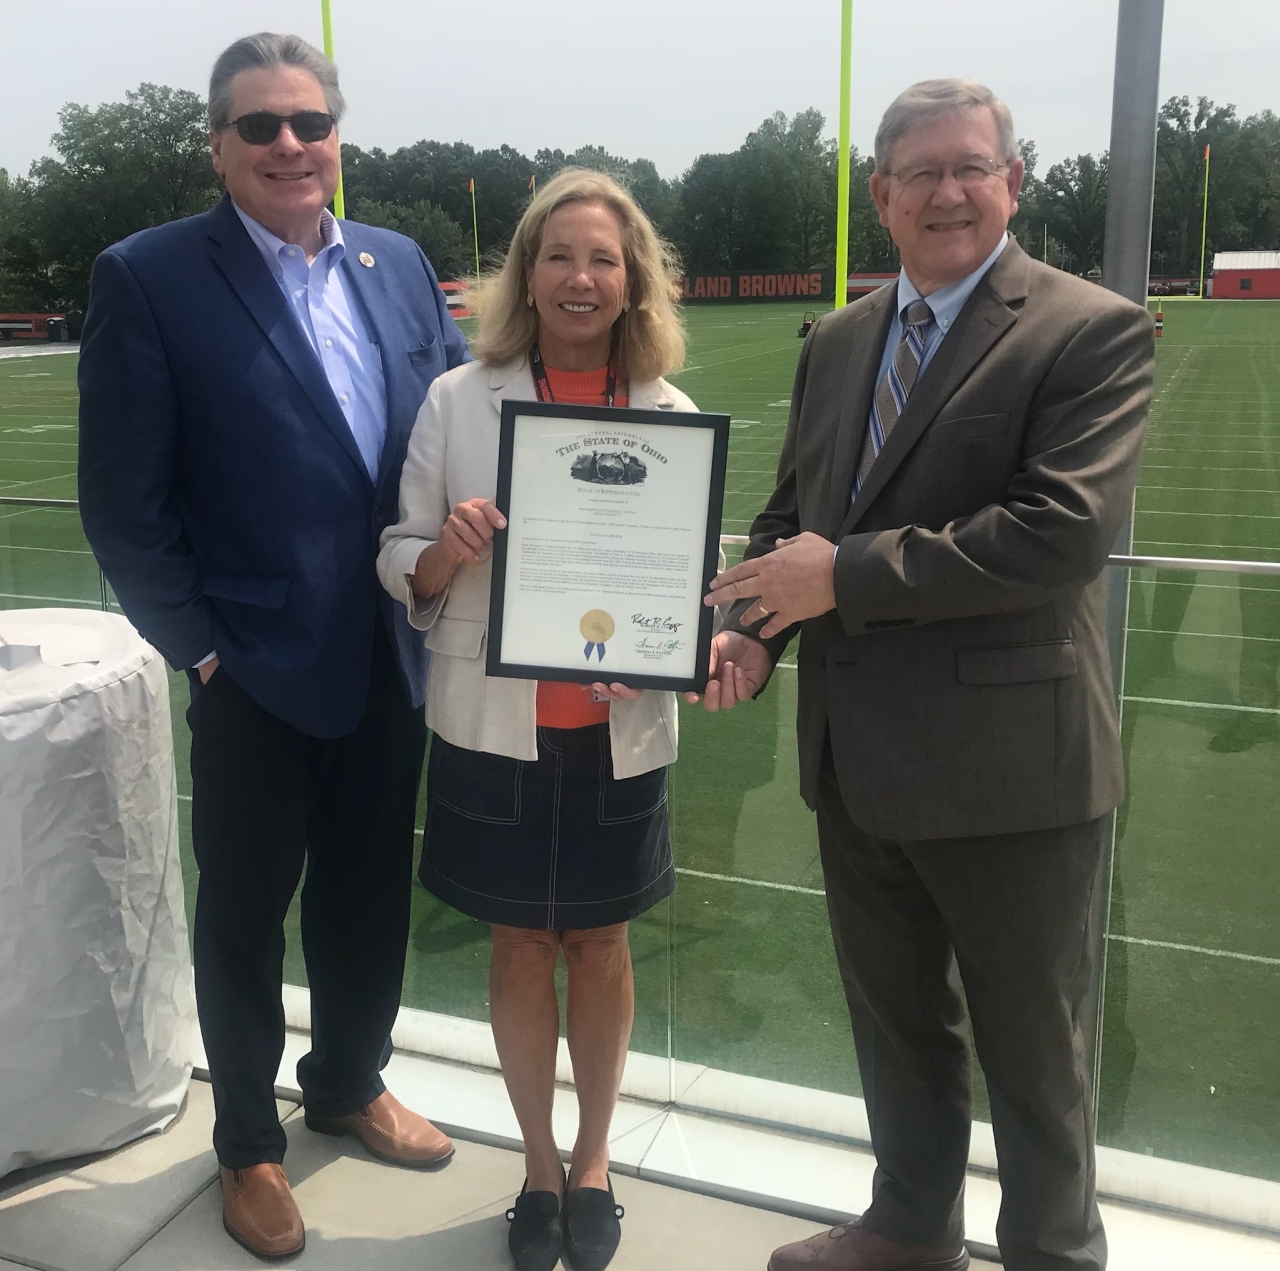 Rep. Patton and Speaker Cupp present a commendation to Cleveland Browns owner Dee Haslam.